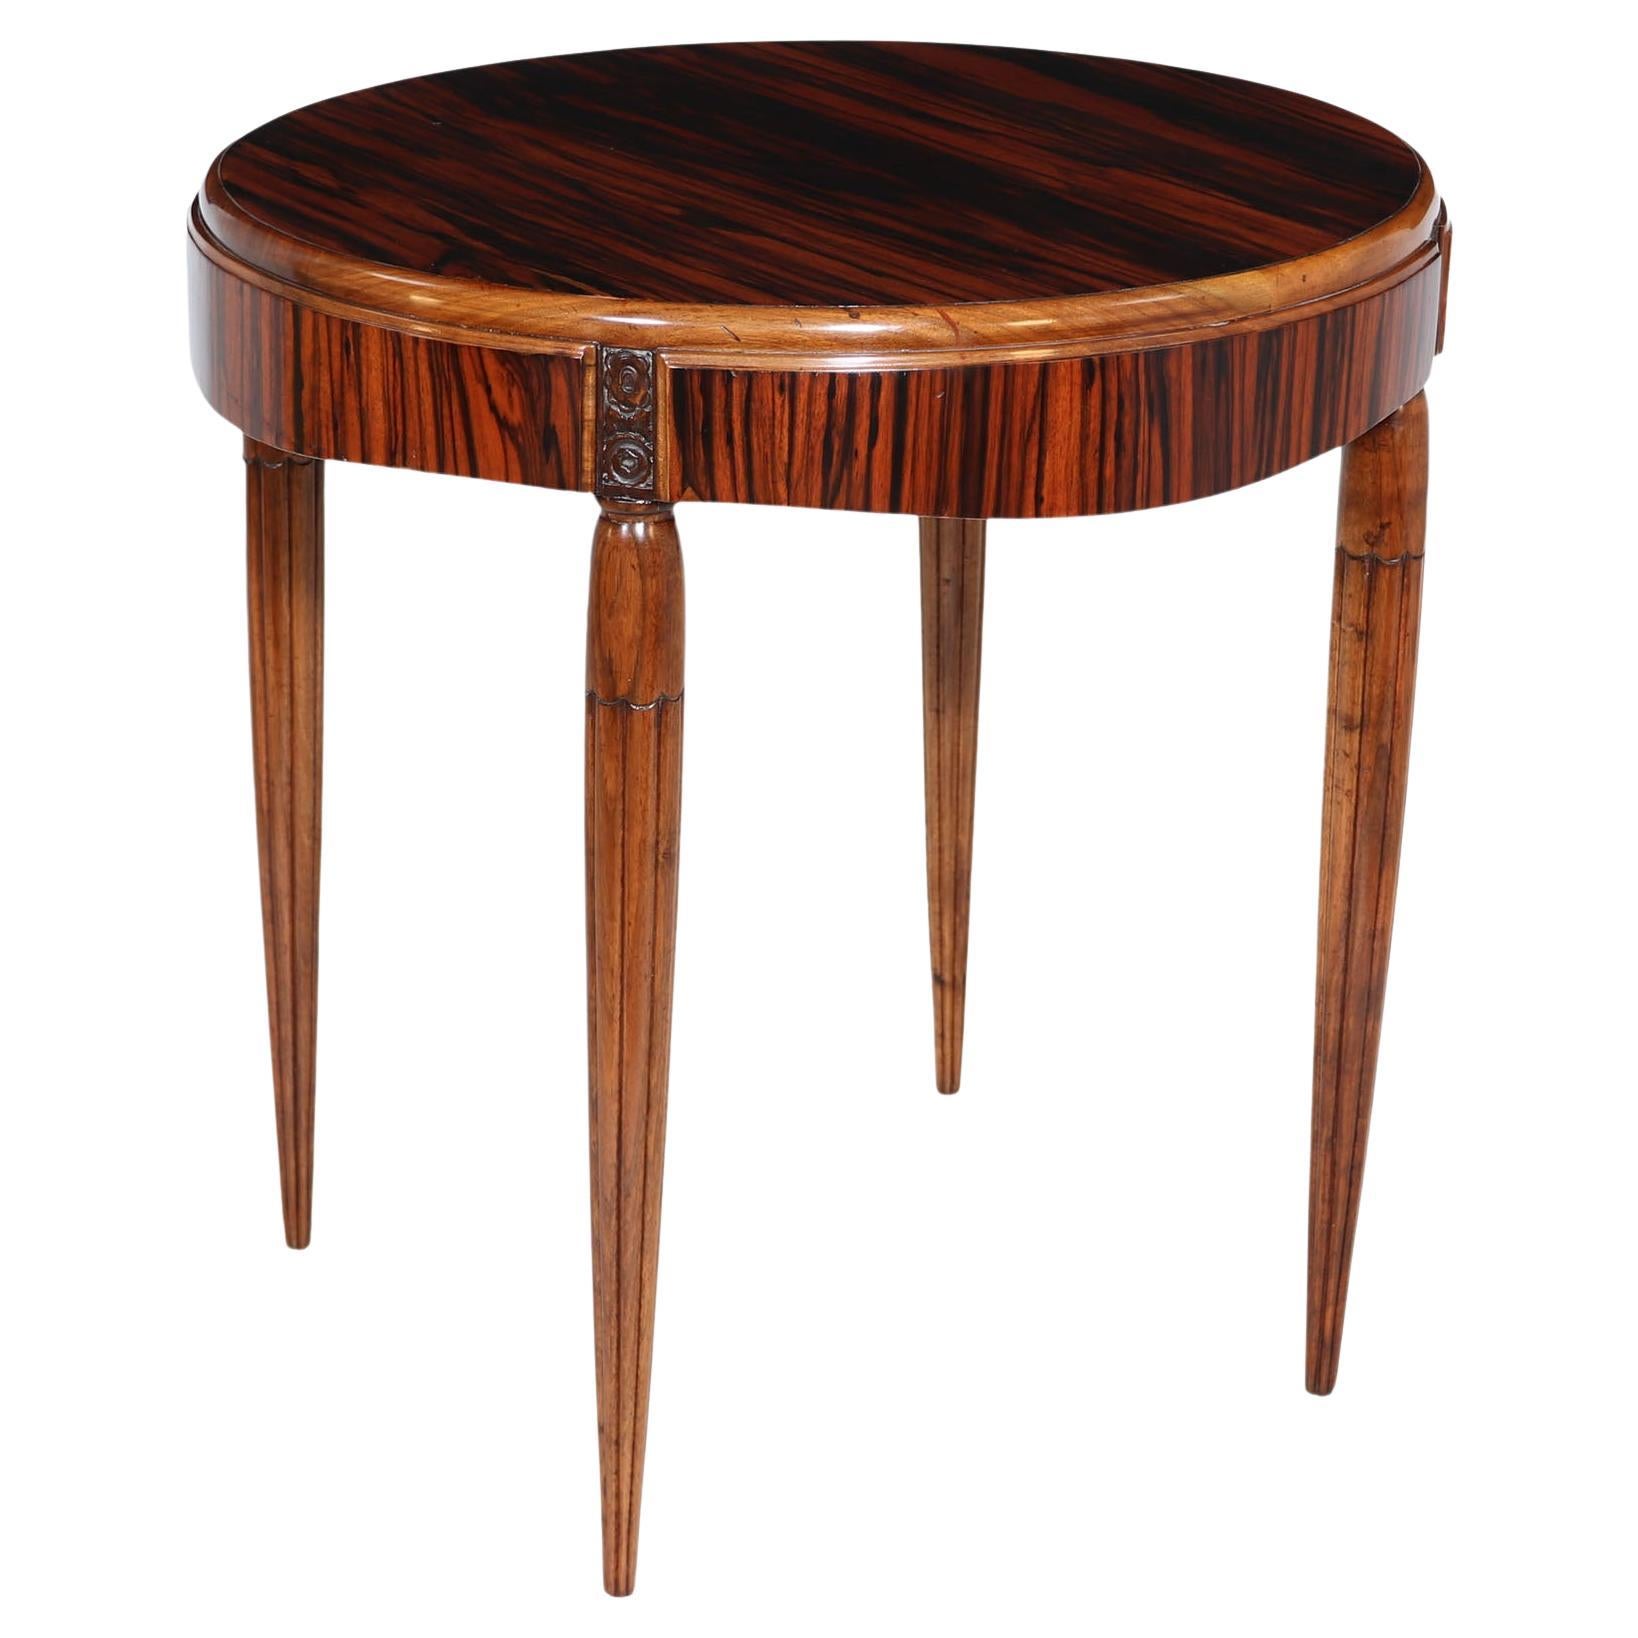 French Art Deco Table in Macassar ebony and Walnut For Sale